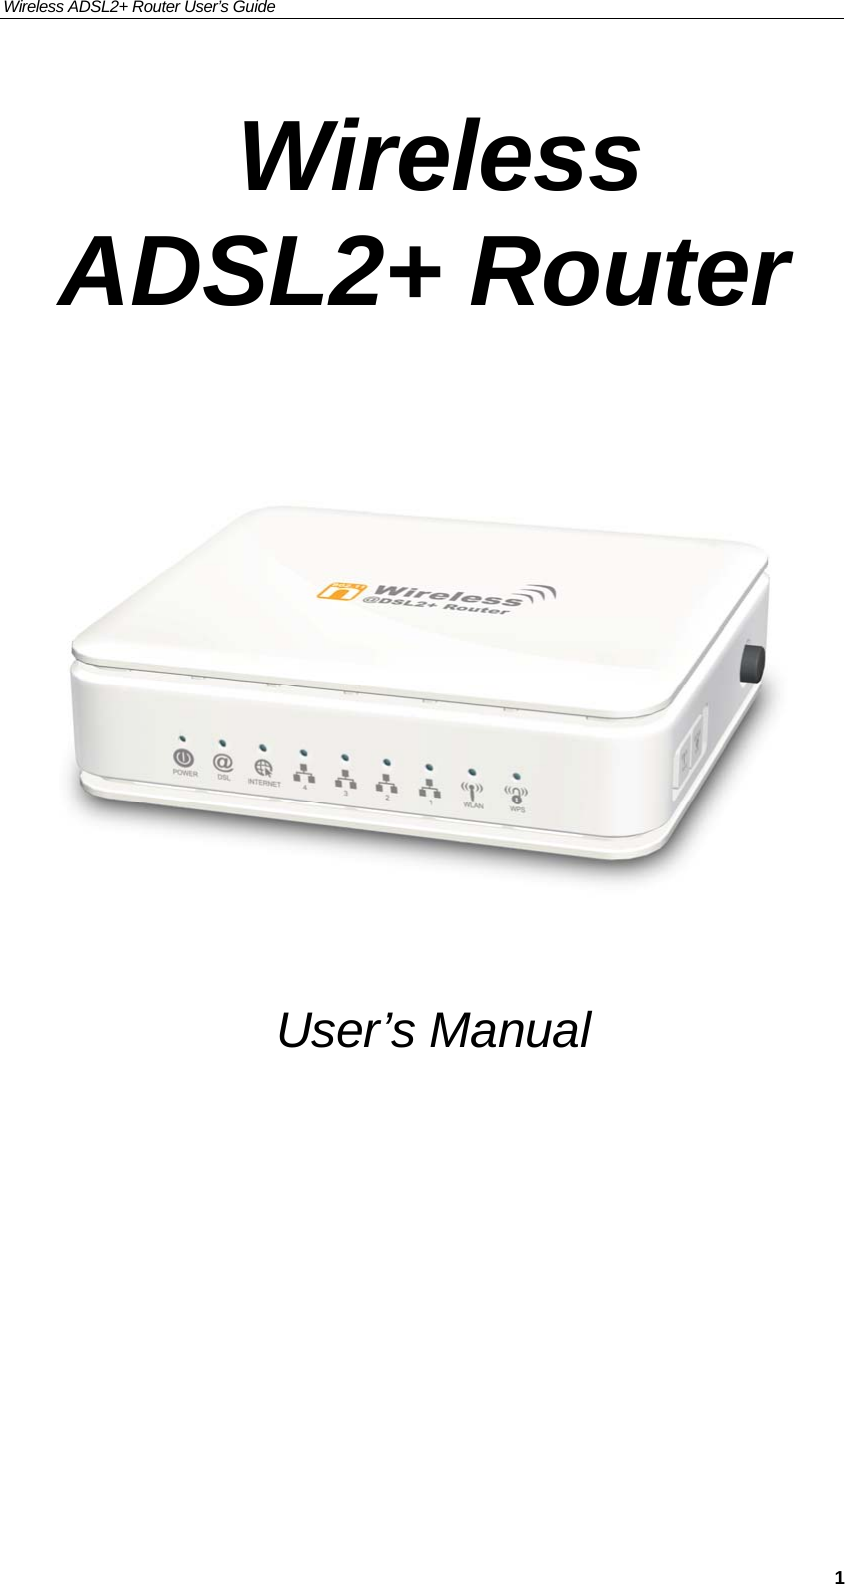 Wireless ADSL2+ Router User’s Guide     1 Wireless ADSL2+ Router         User’s Manual   